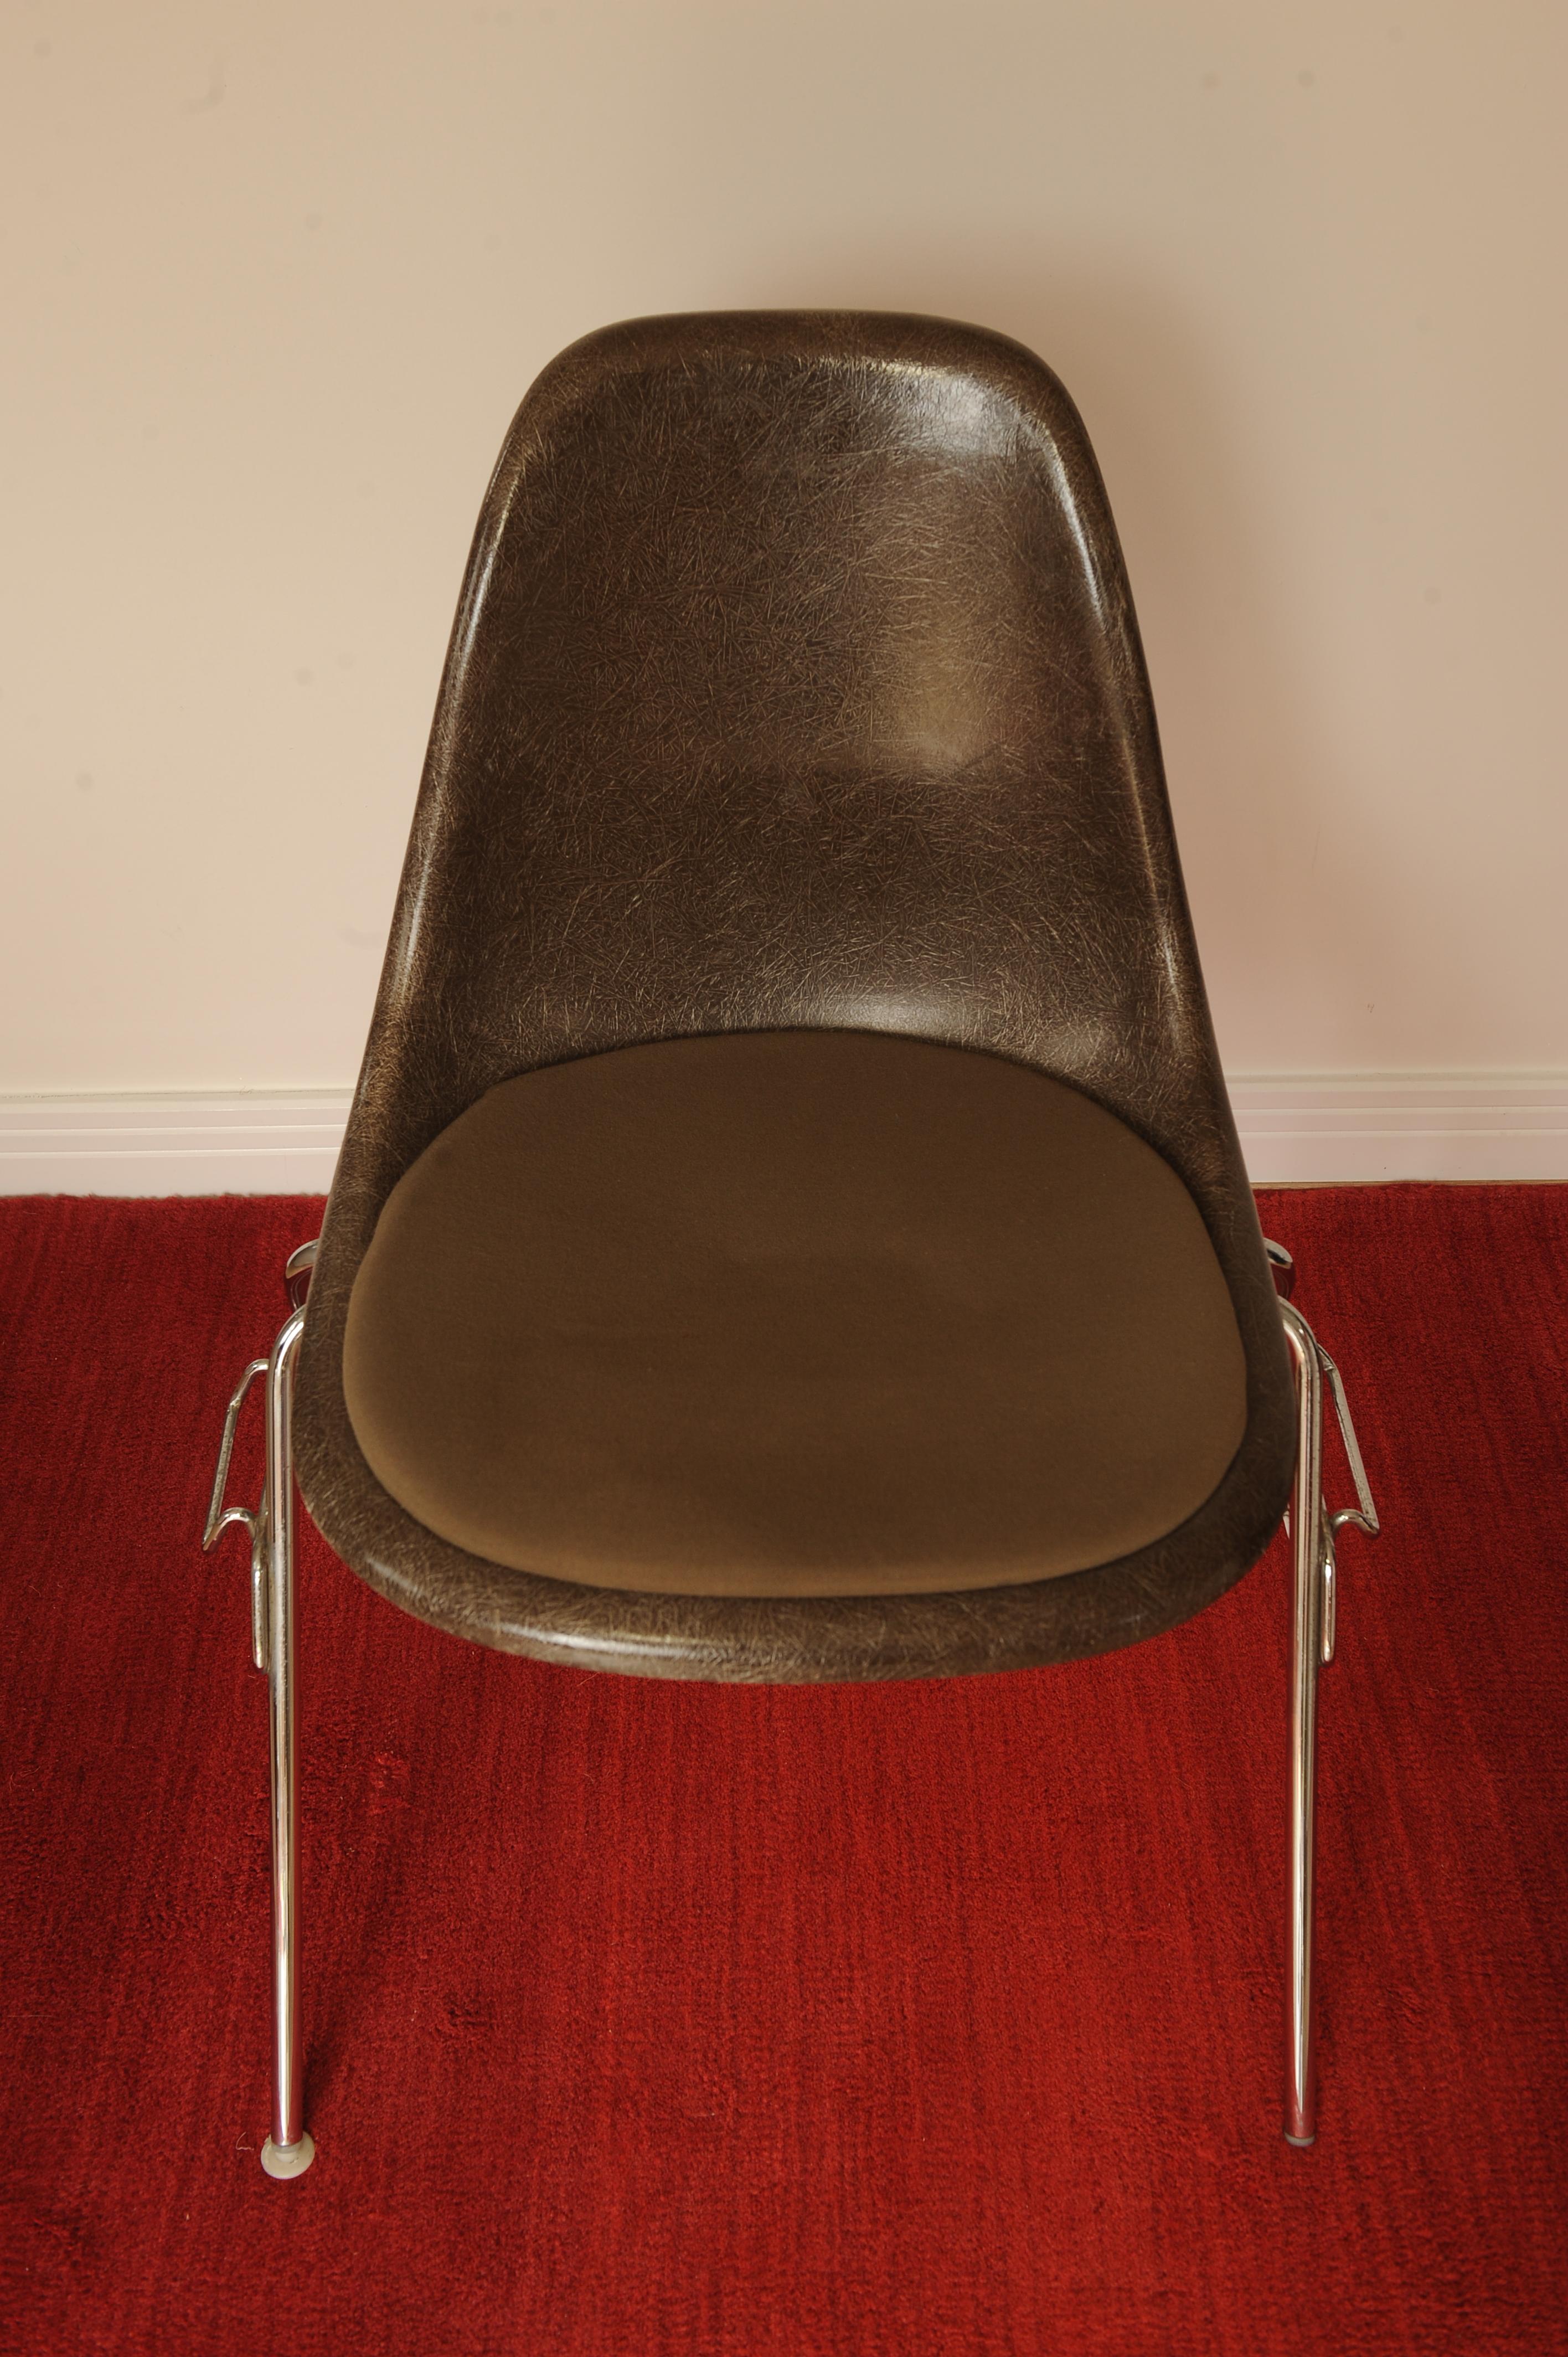 Charles & Ray Eames Herman Miller original DSS fiberglass chrome stacking chair with brown upholstered cushion afixed to chair seat. Labelled with makers mark to base of chair.

 